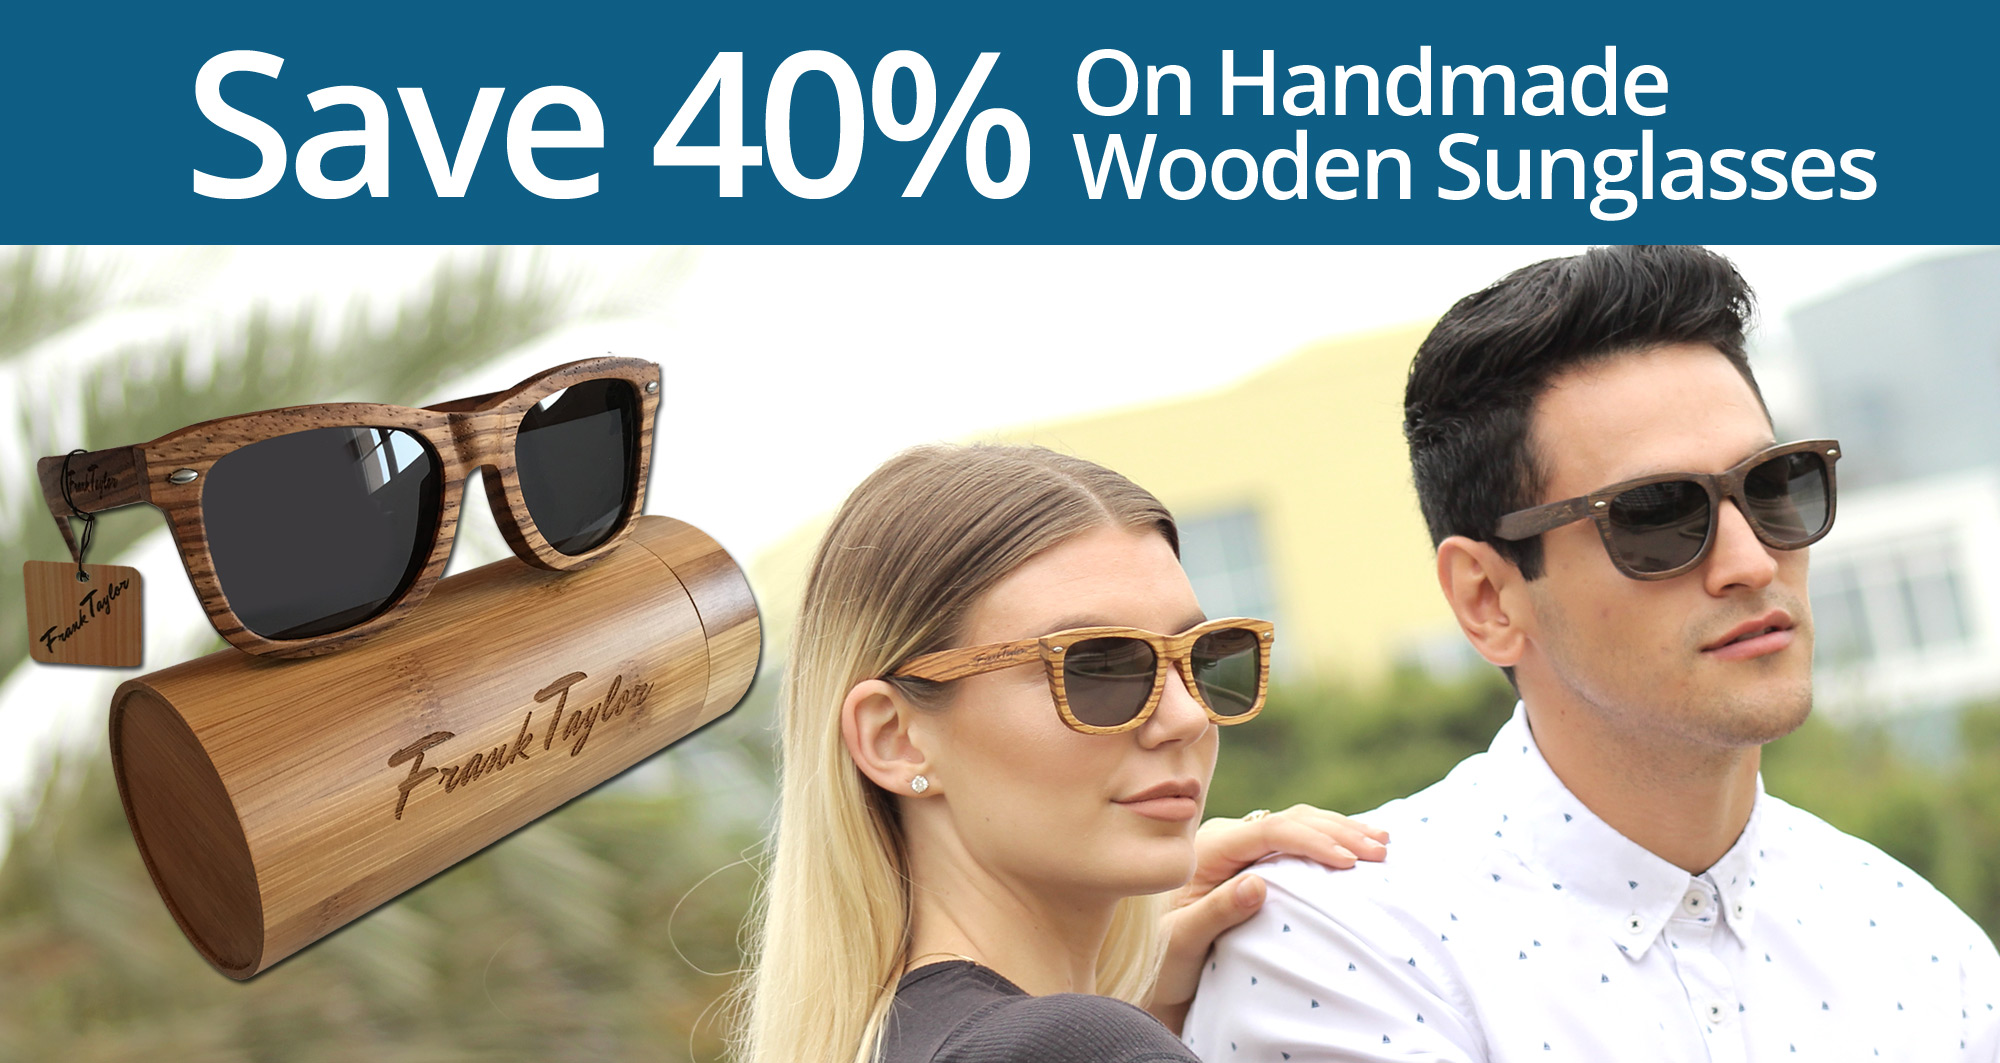 Win a Free of Frank Taylor Wooden Sunglasses